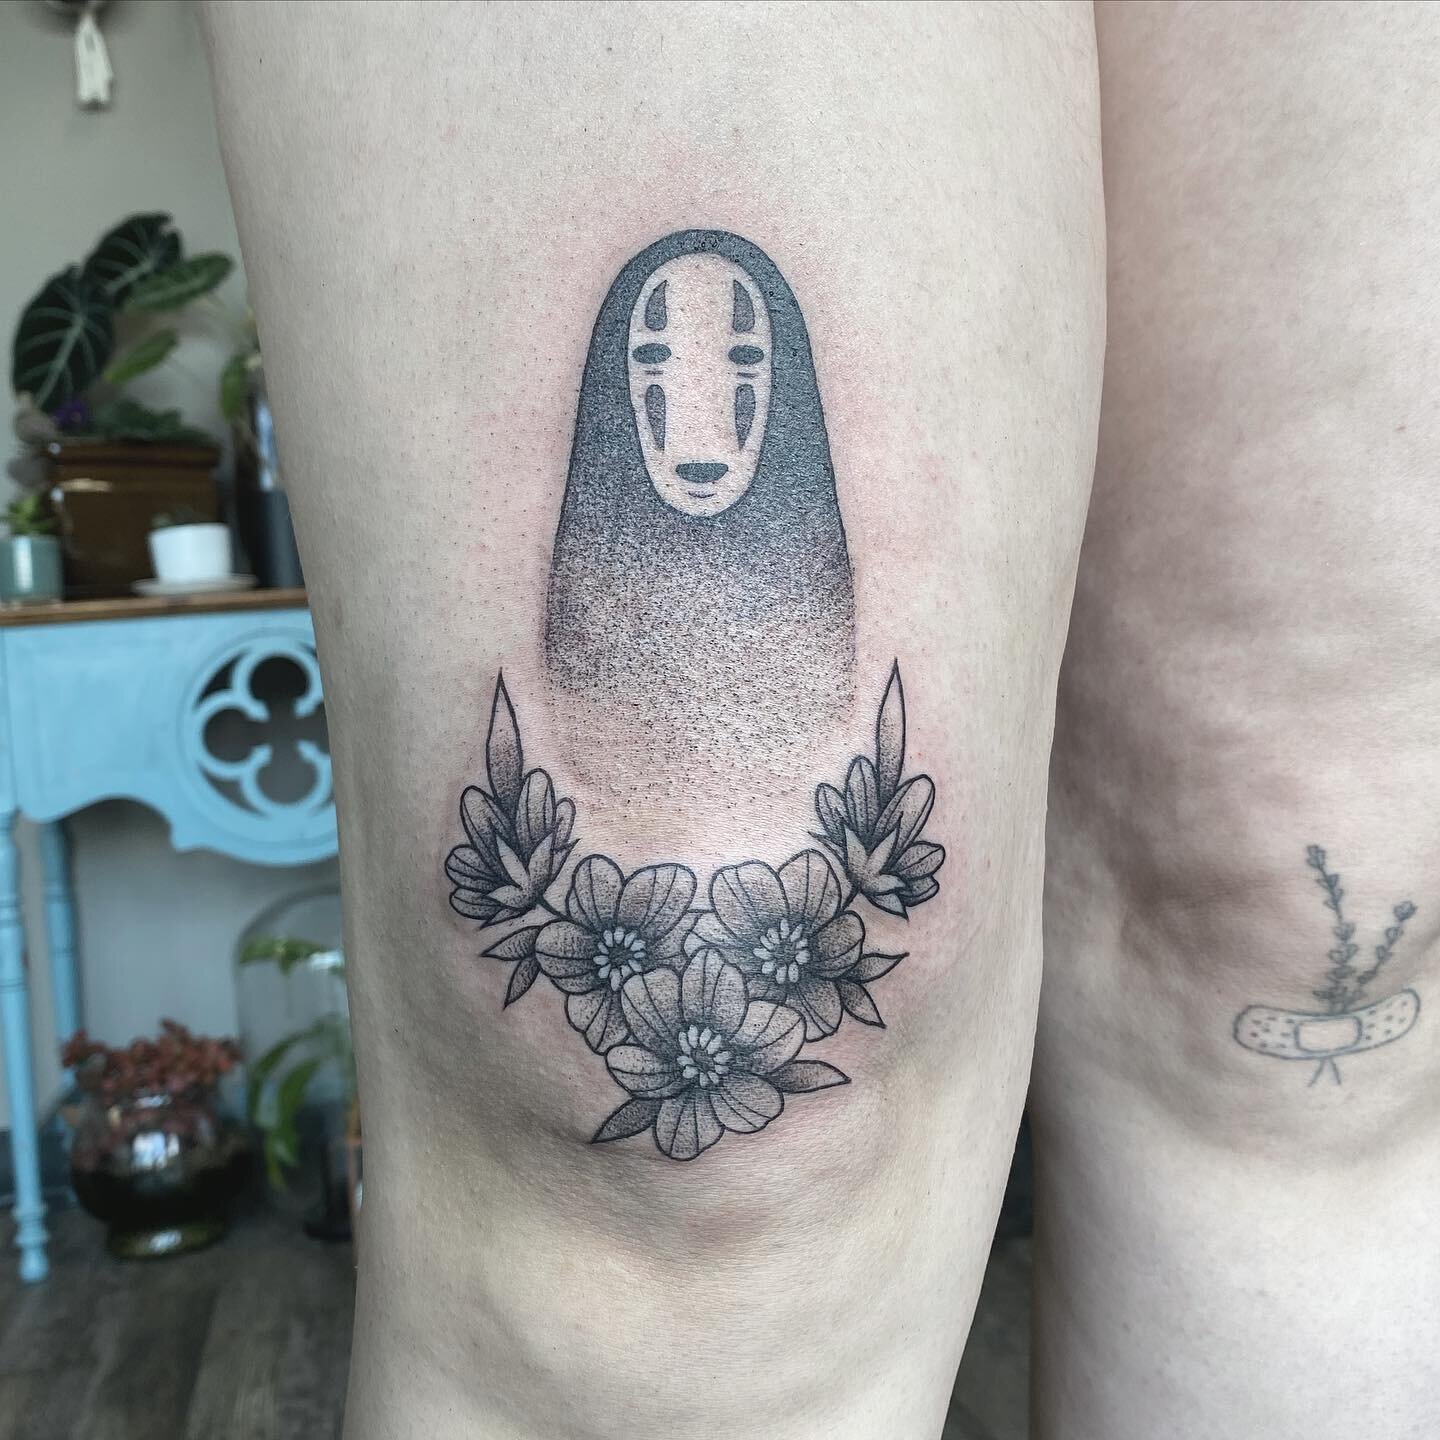 Made this No Face for @jacgoheen today! Thank you so much 💚
.
.
.
.
.
.
#noface #nofacetattoo #spiritedaway #spiritedawaytattoo #studioghibli #studioghiblitattoo #ghiblitattoo #floral #floraltattoo #threekeystattoo